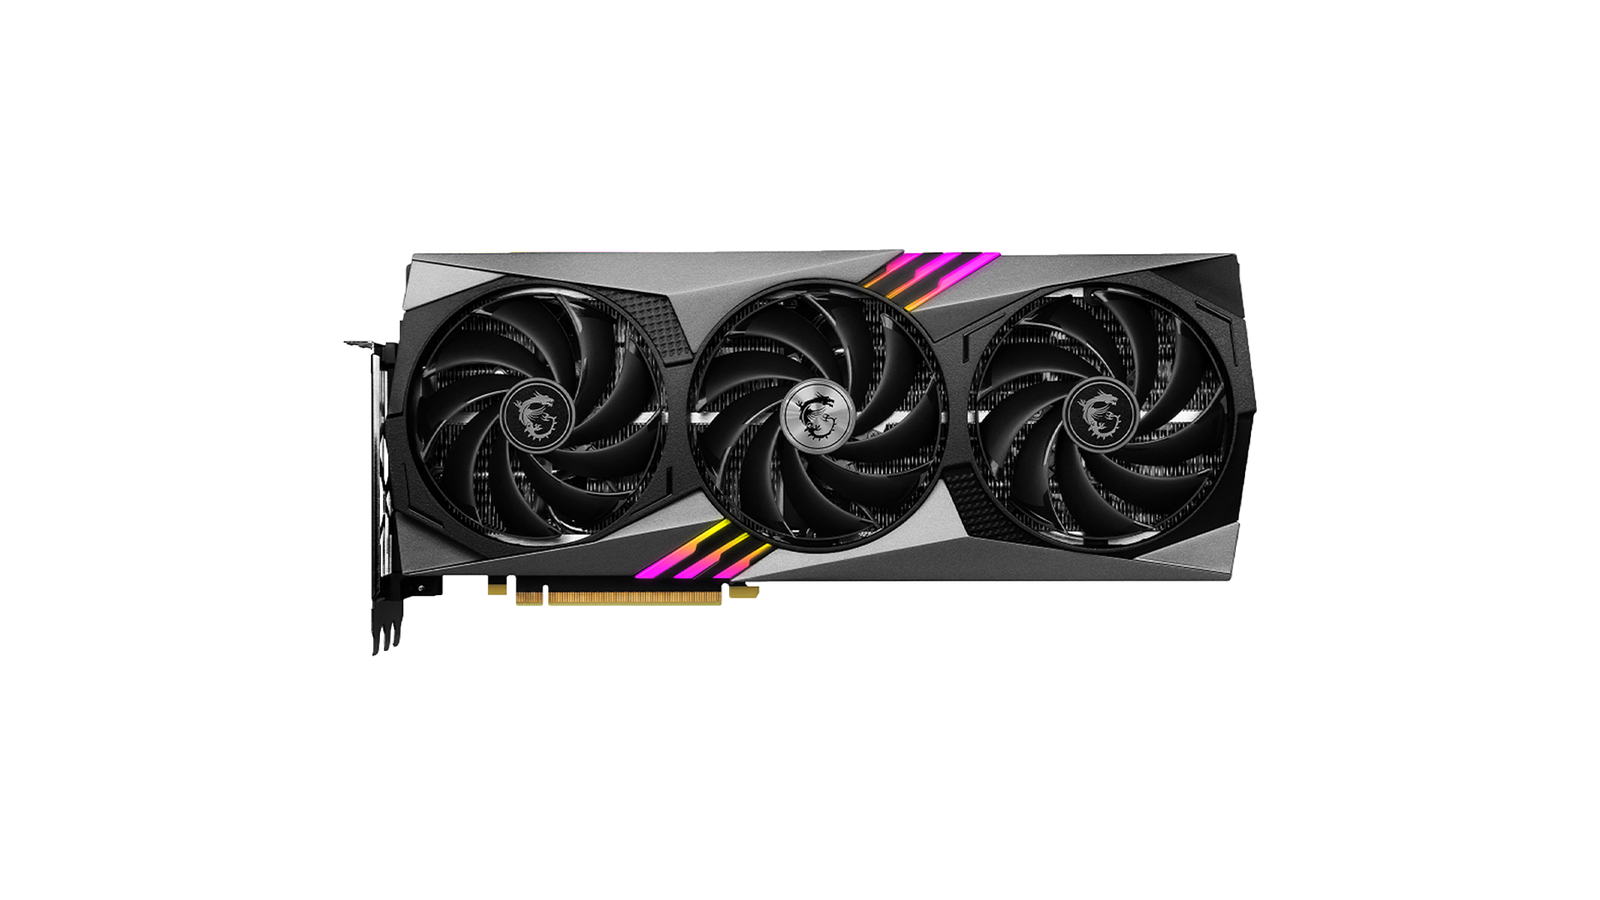 Nvidia GeForce RTX 4070 Ti - The ideal graphics card that blends price and performance for most users